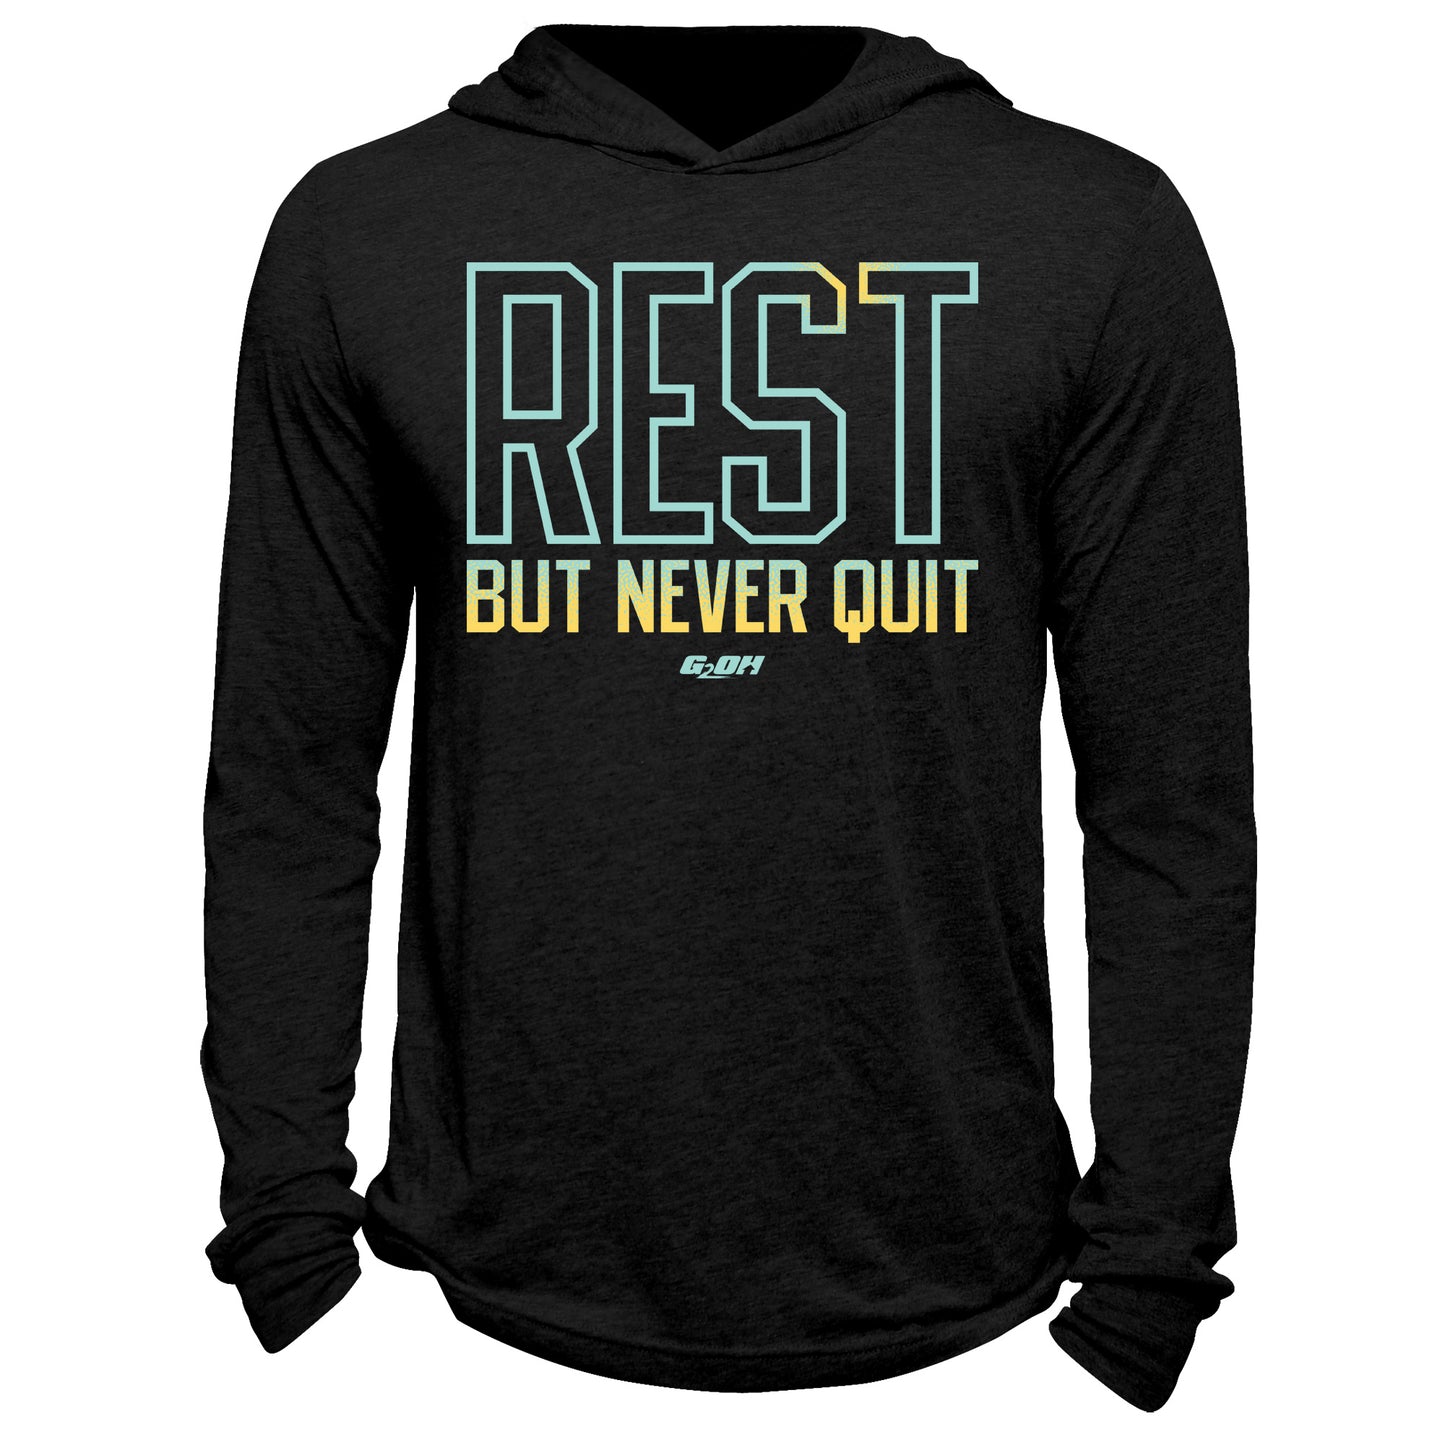 Rest But Never Quit Hoodie